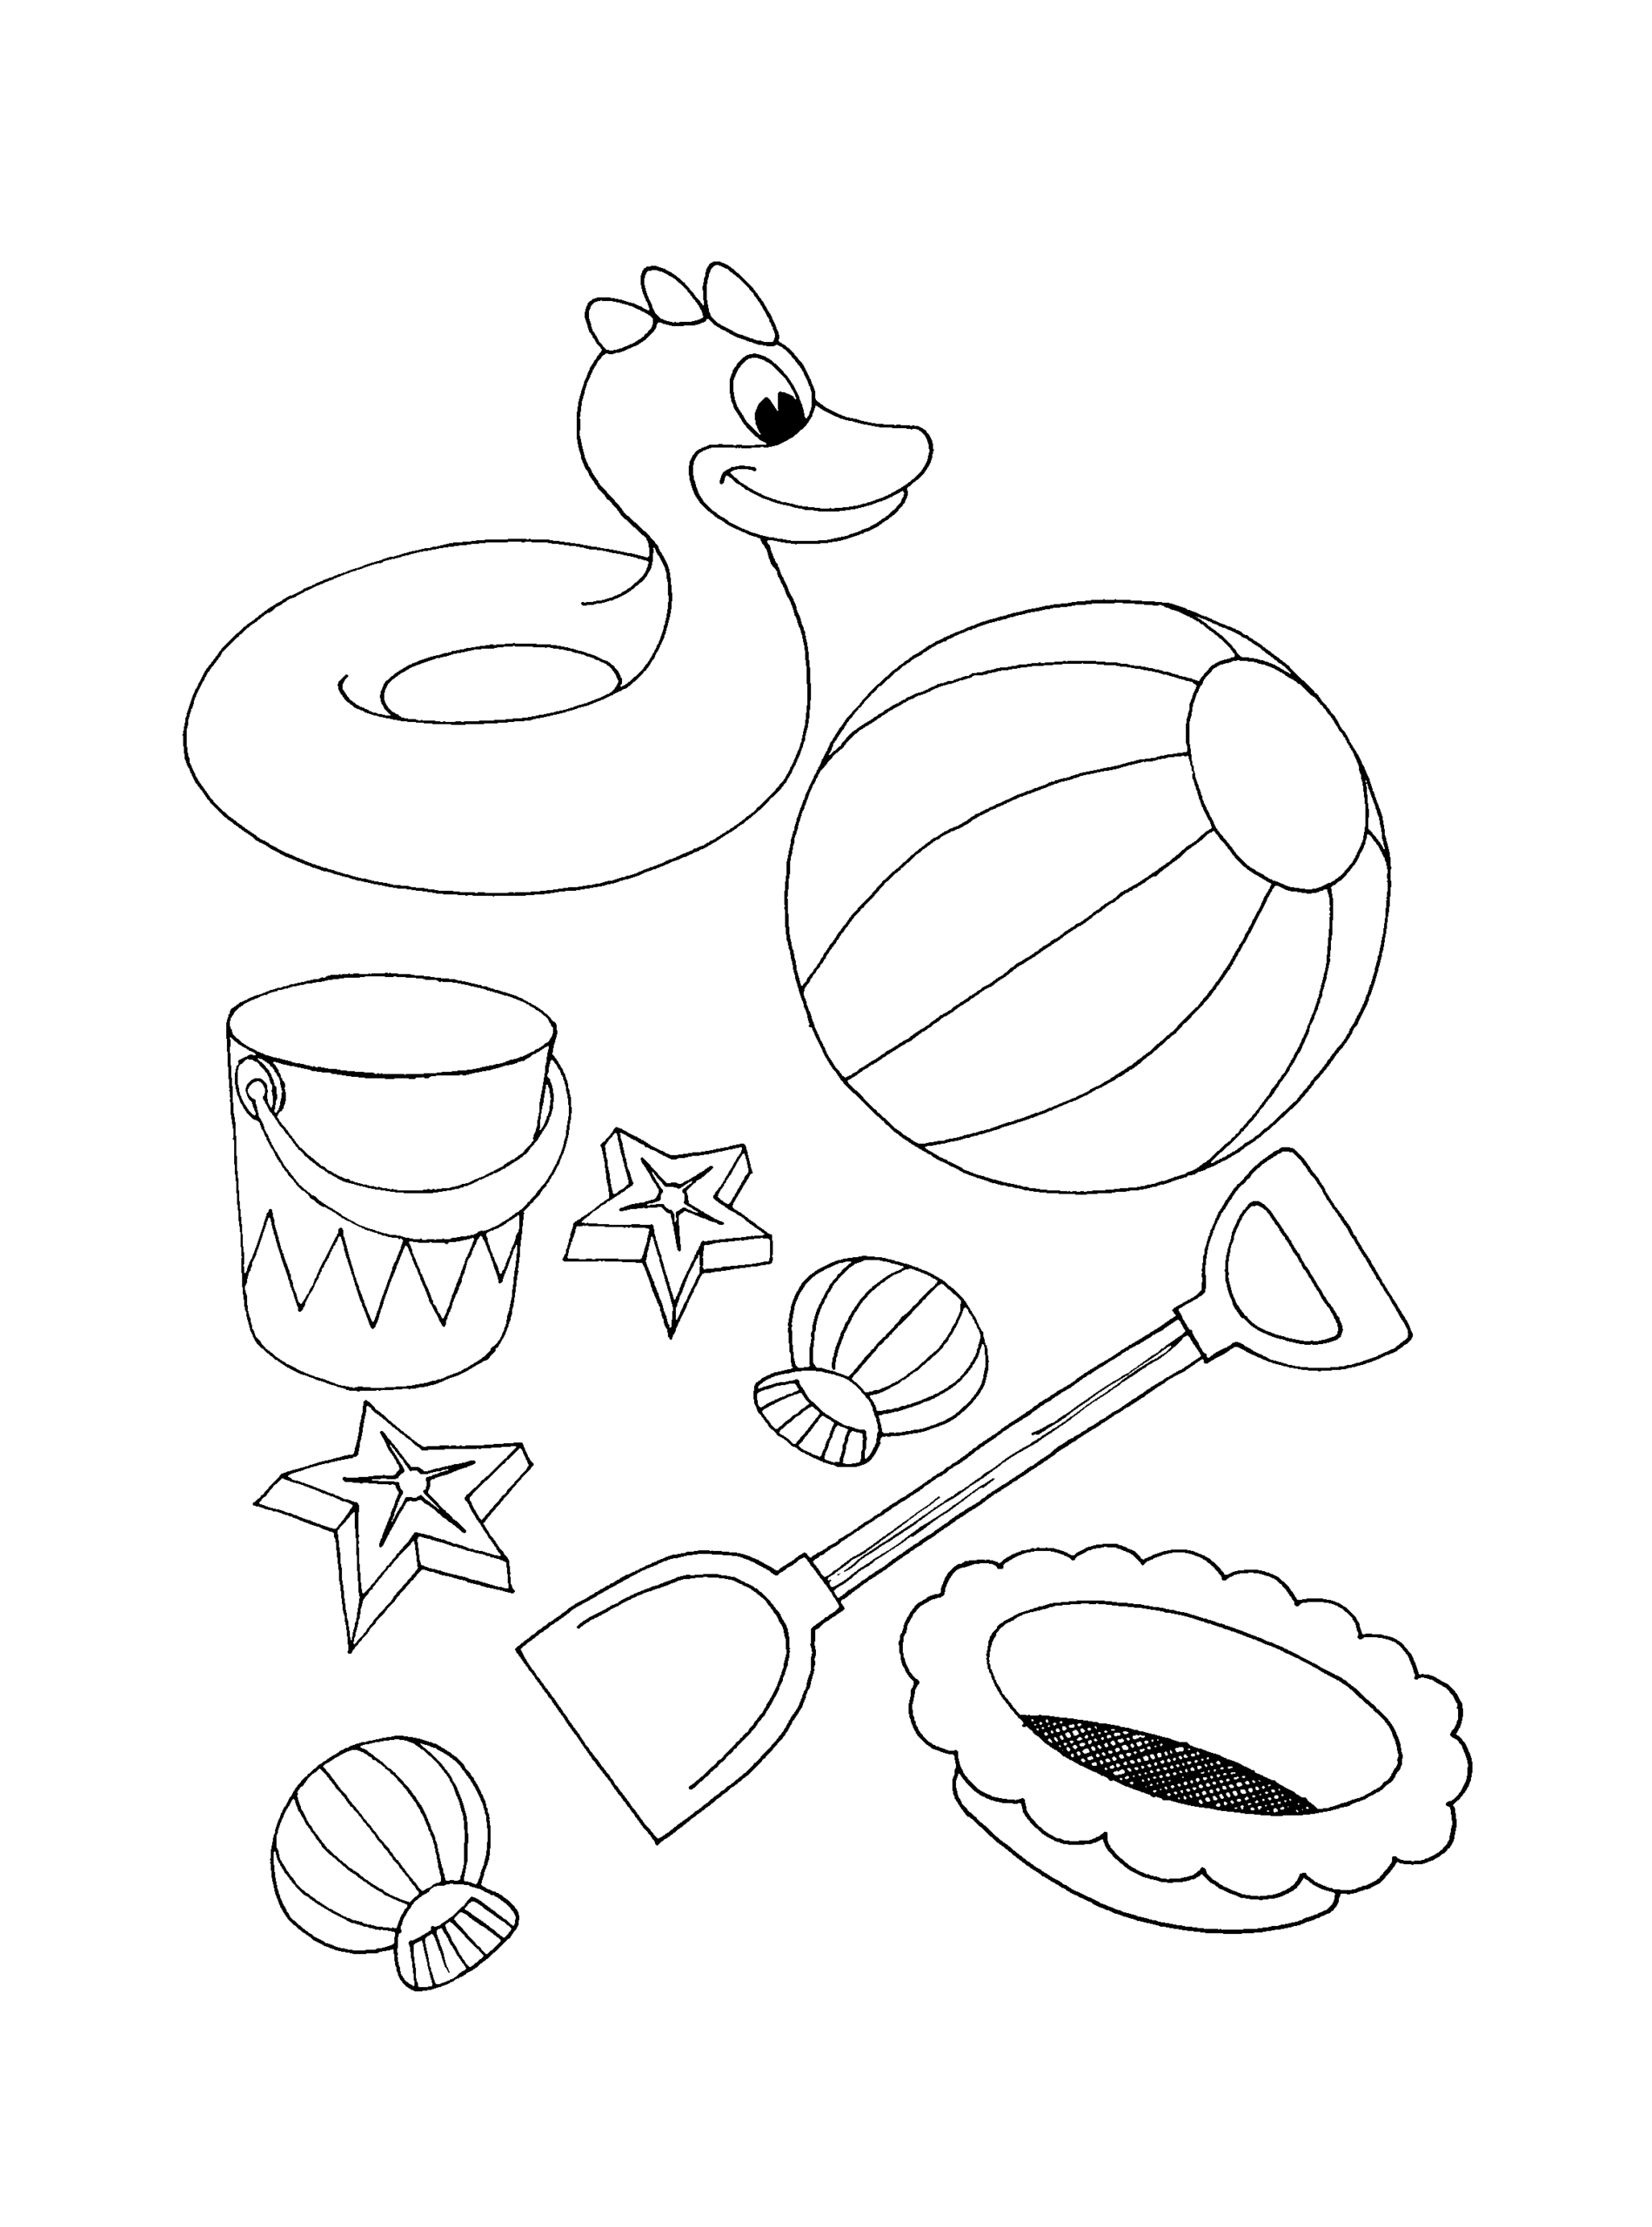 Spike and Suzy Coloring Pages Cartoons spike and suzy 34 Printable 2020 5922 Coloring4free